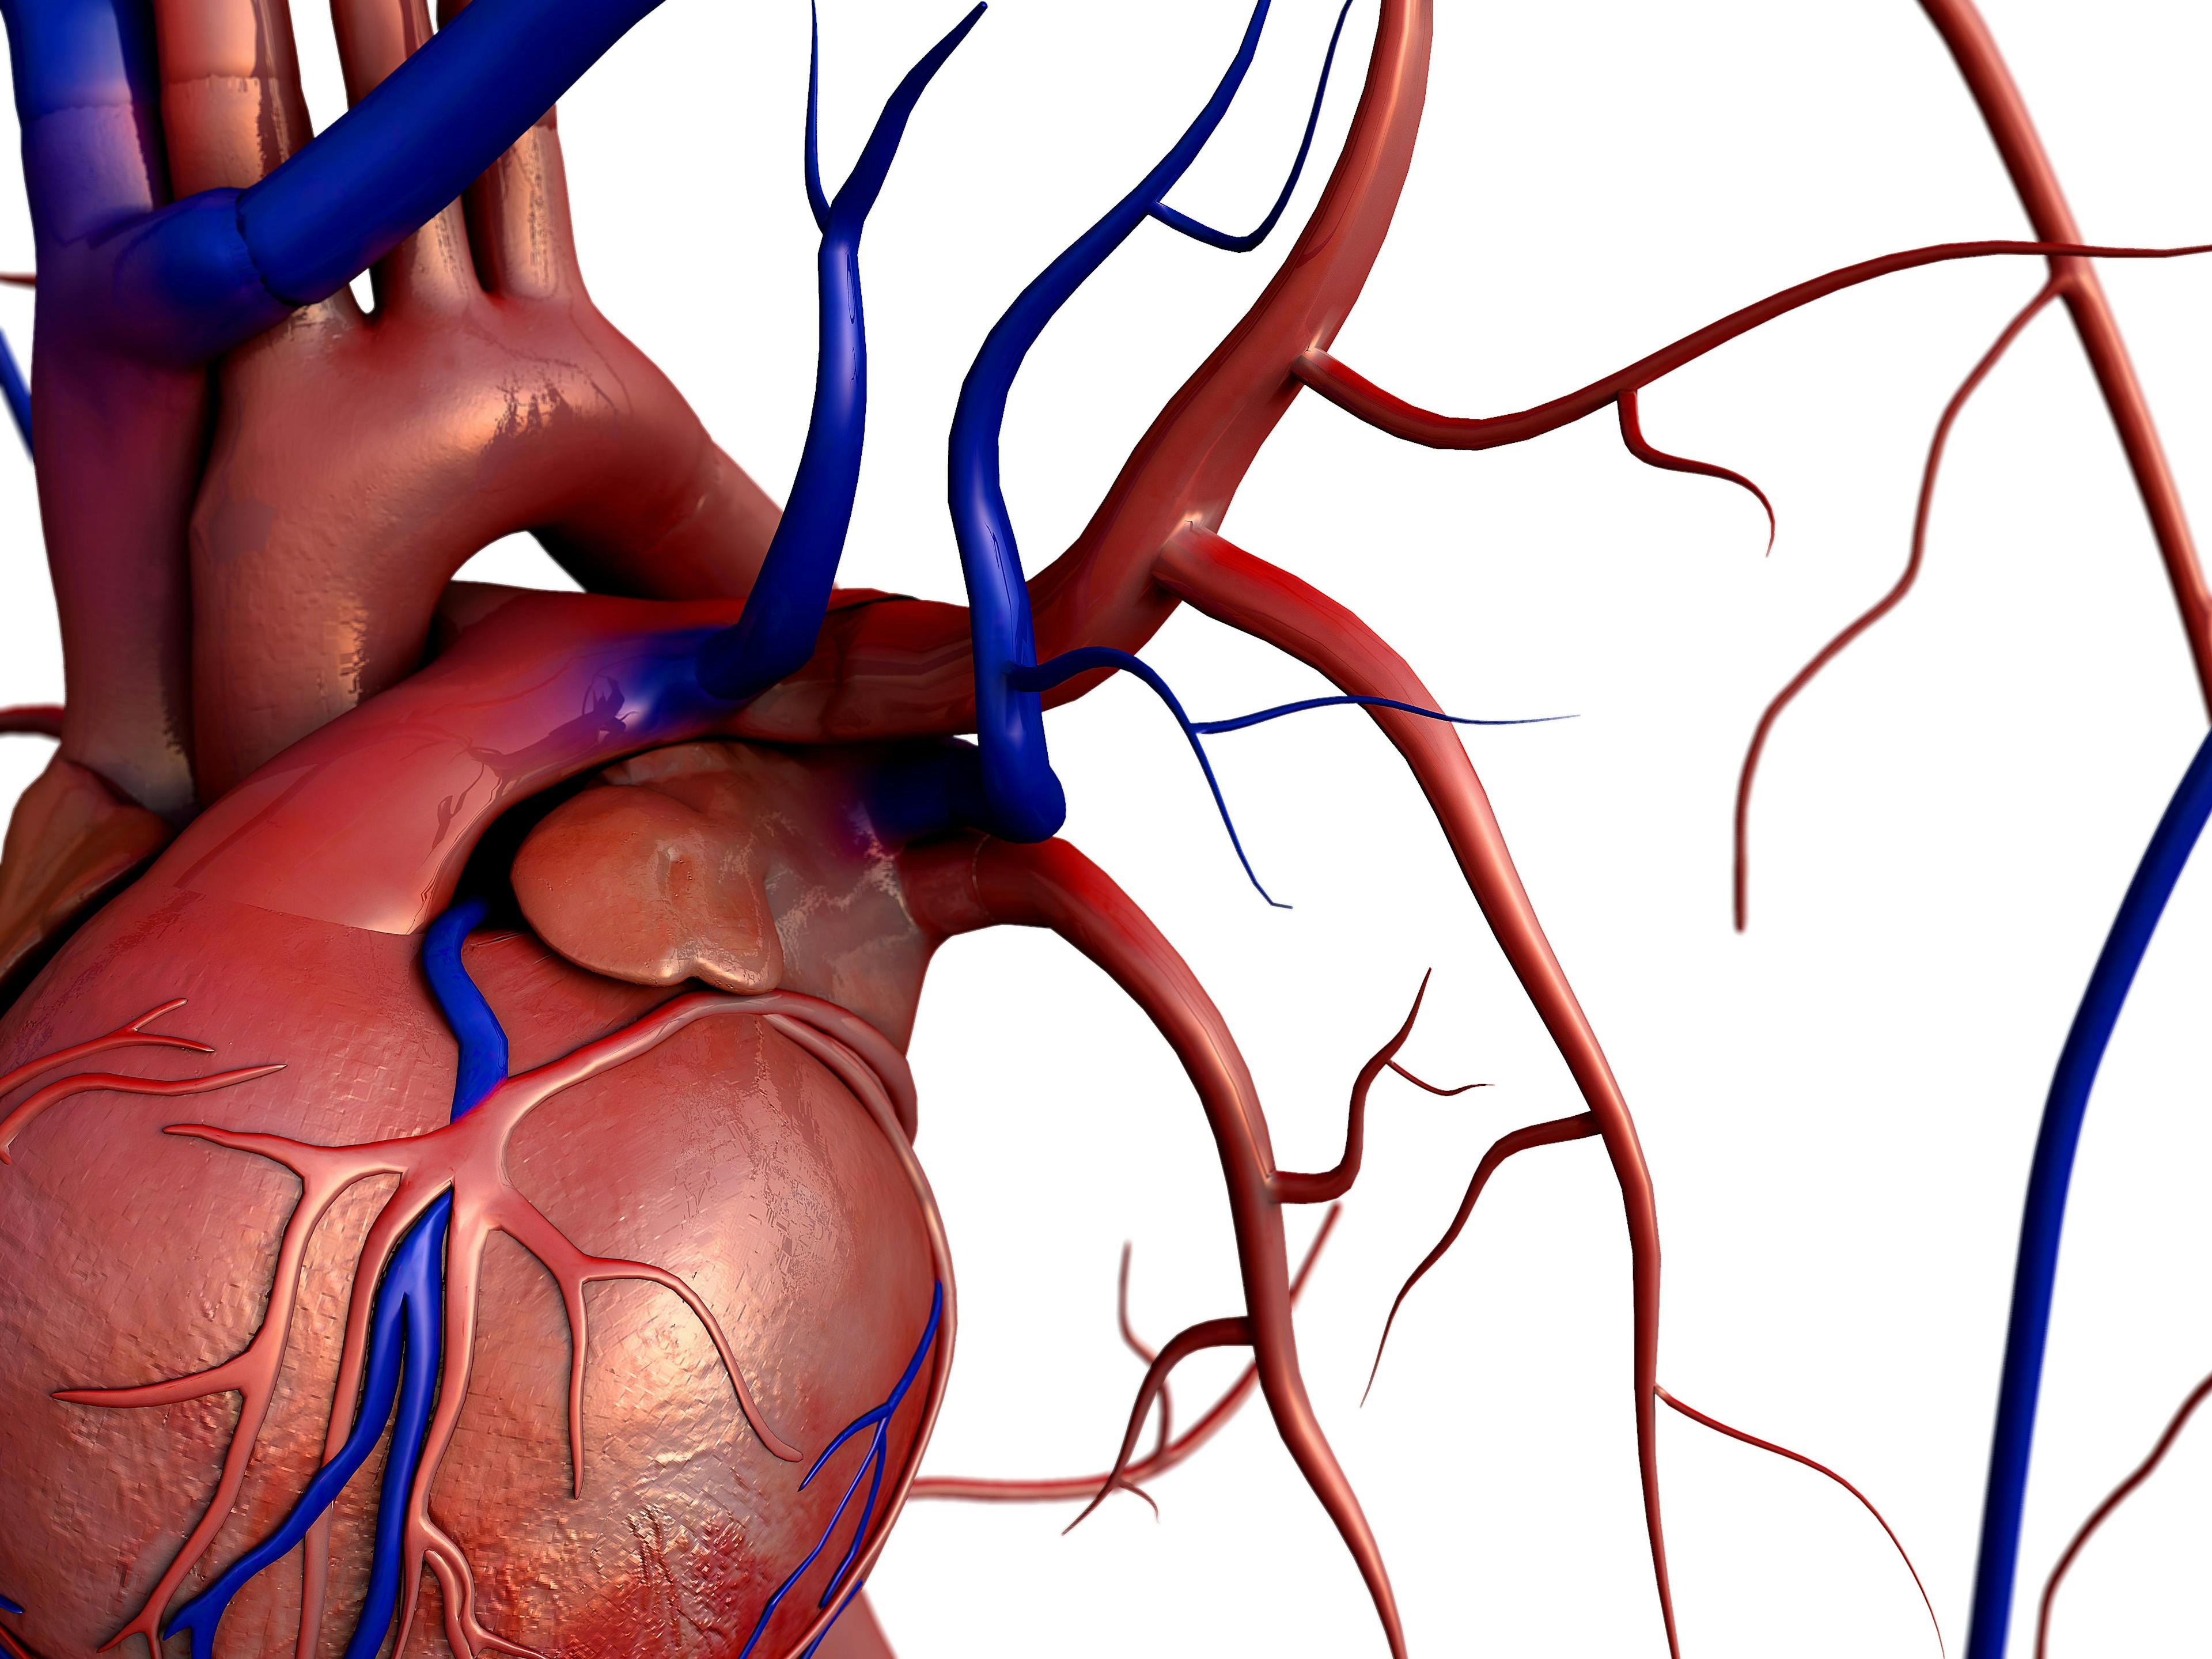 STS/AATS Release New Guidelines for Type B Aortic Dissection